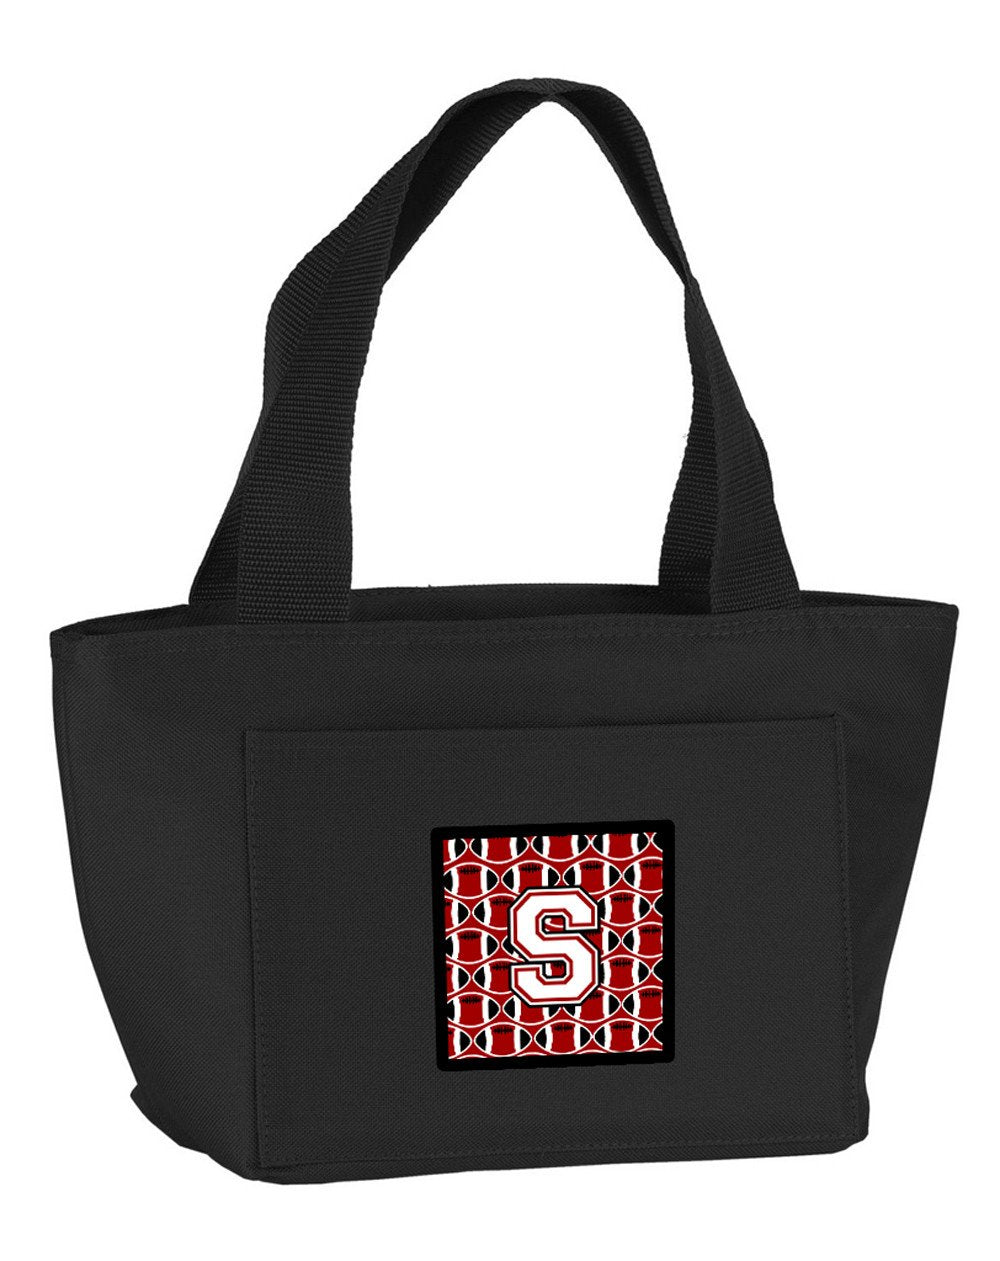 Letter S Football Cardinal and White Lunch Bag CJ1082-SBK-8808 by Caroline's Treasures